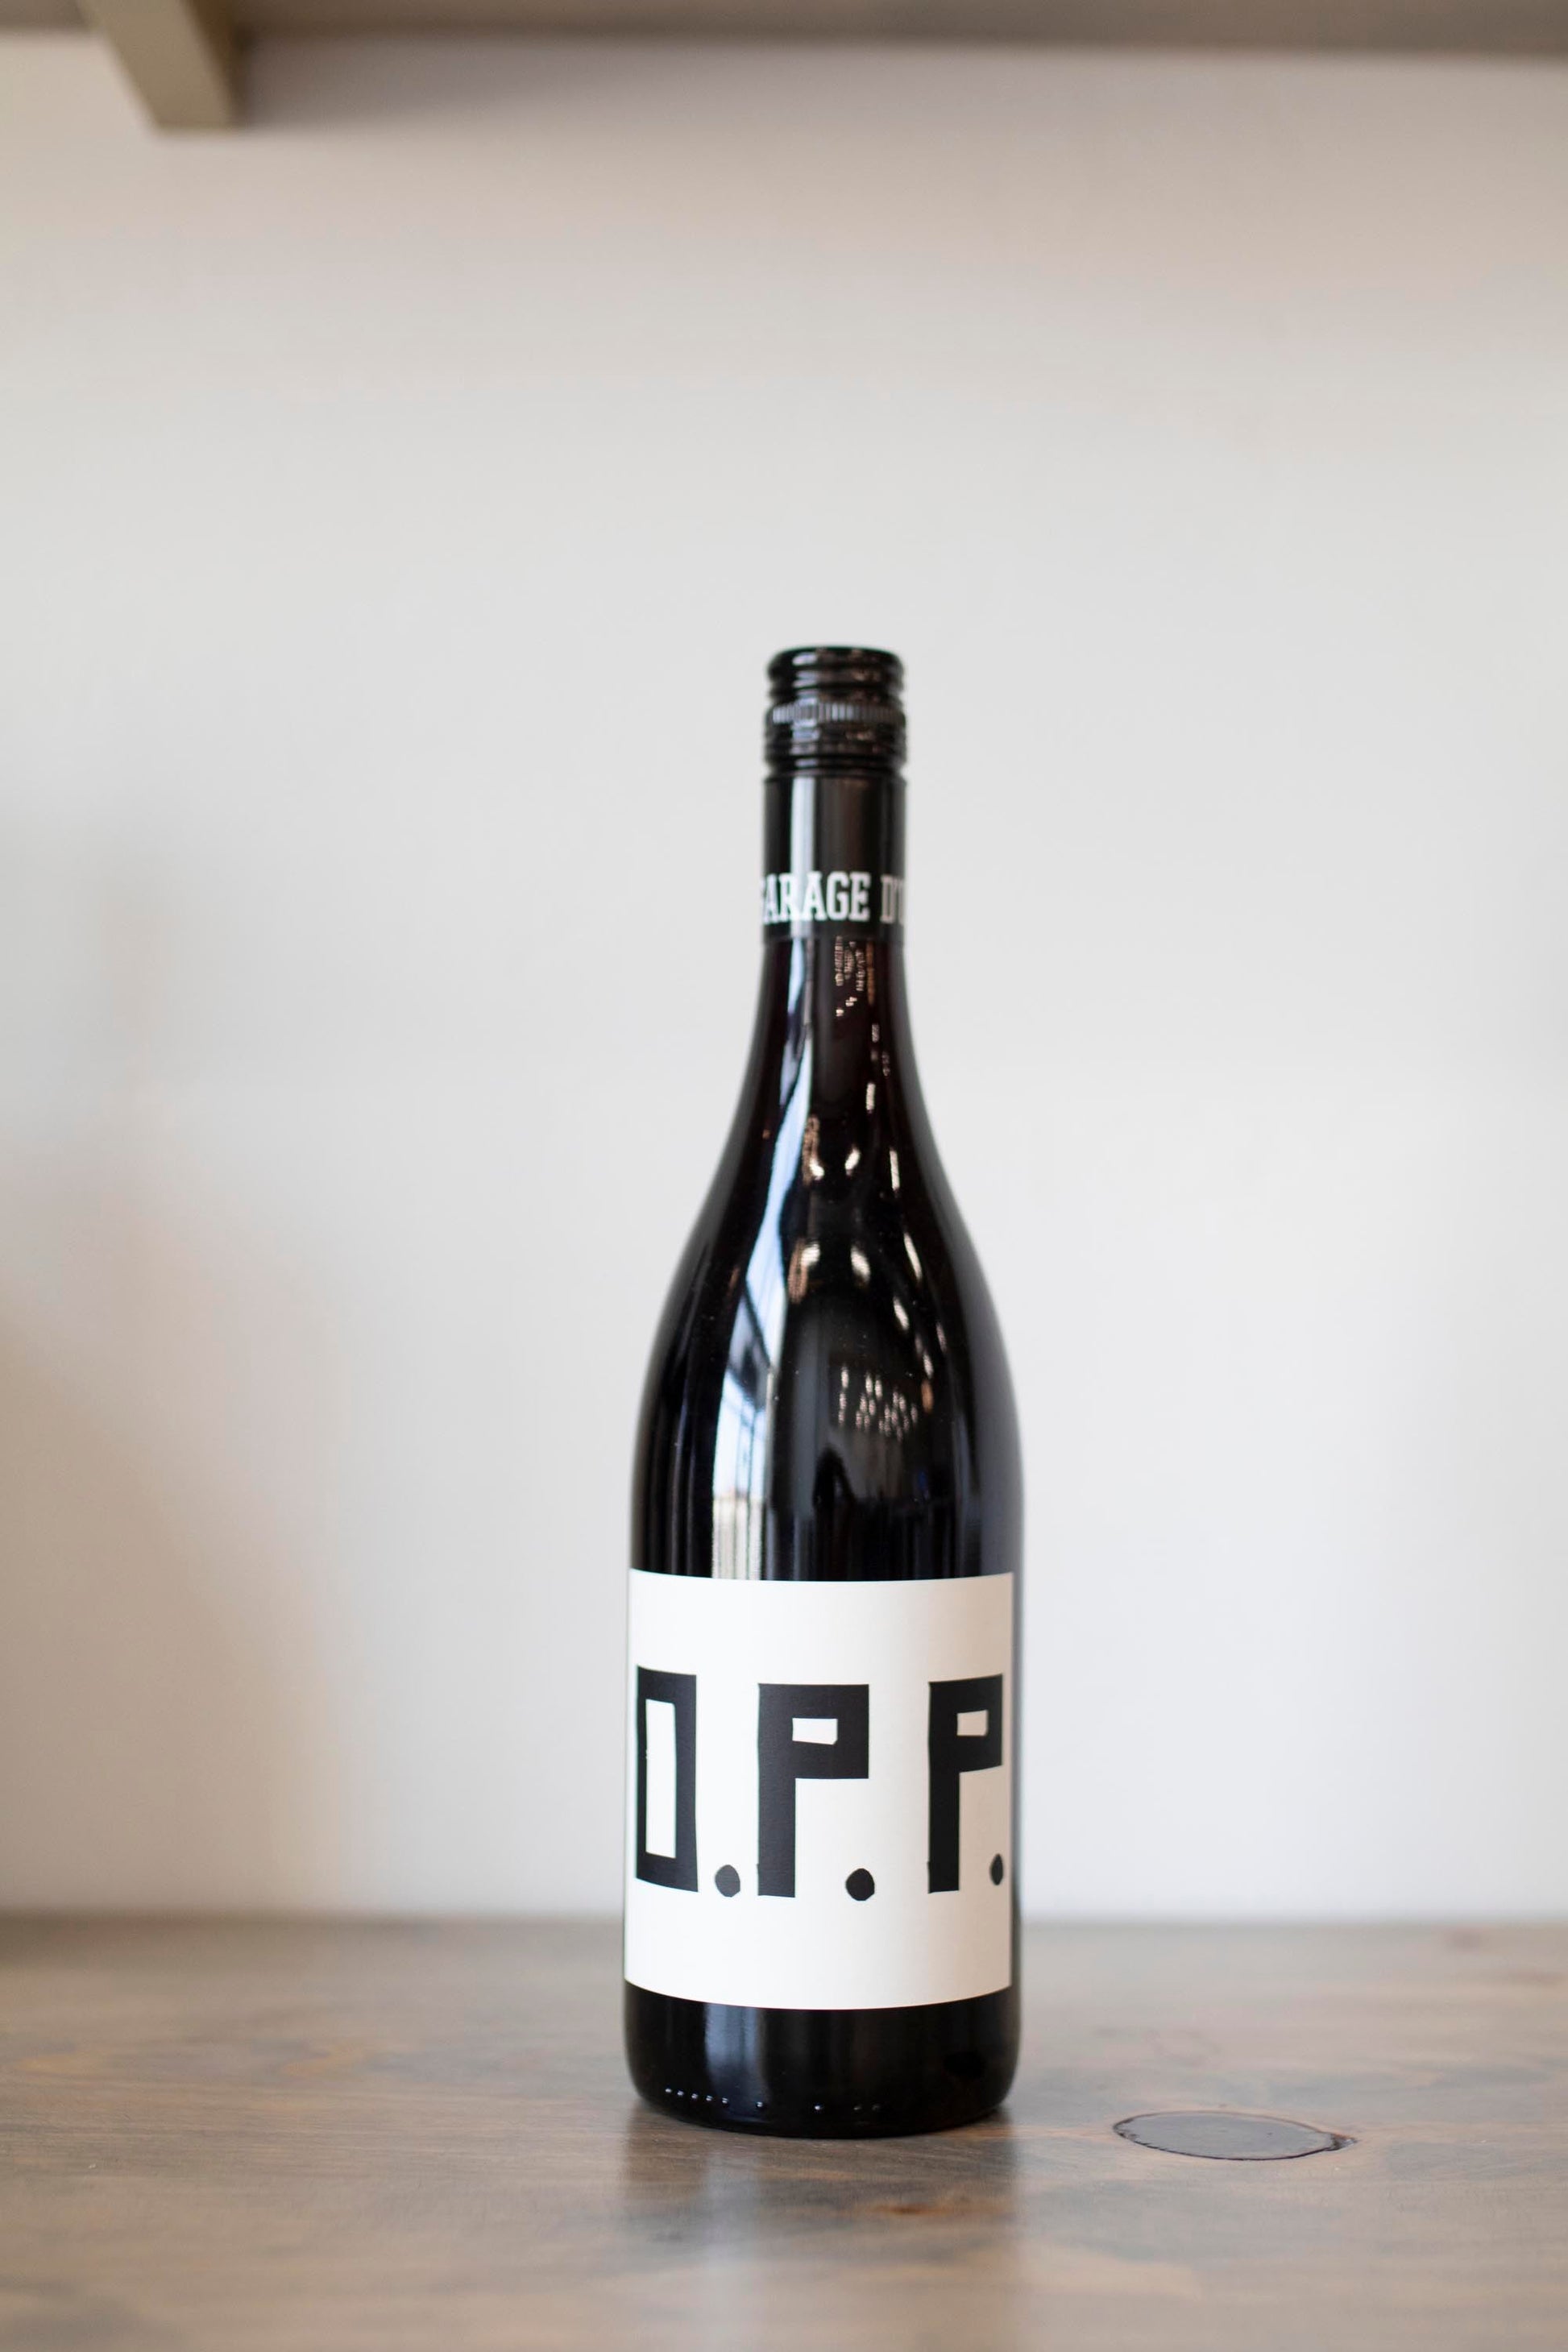 Bottle of 0.P.P. Pinot Noir Willamette found at Vine & Board in 3809 NW 166th St Suite 1, Edmond, OK 73012